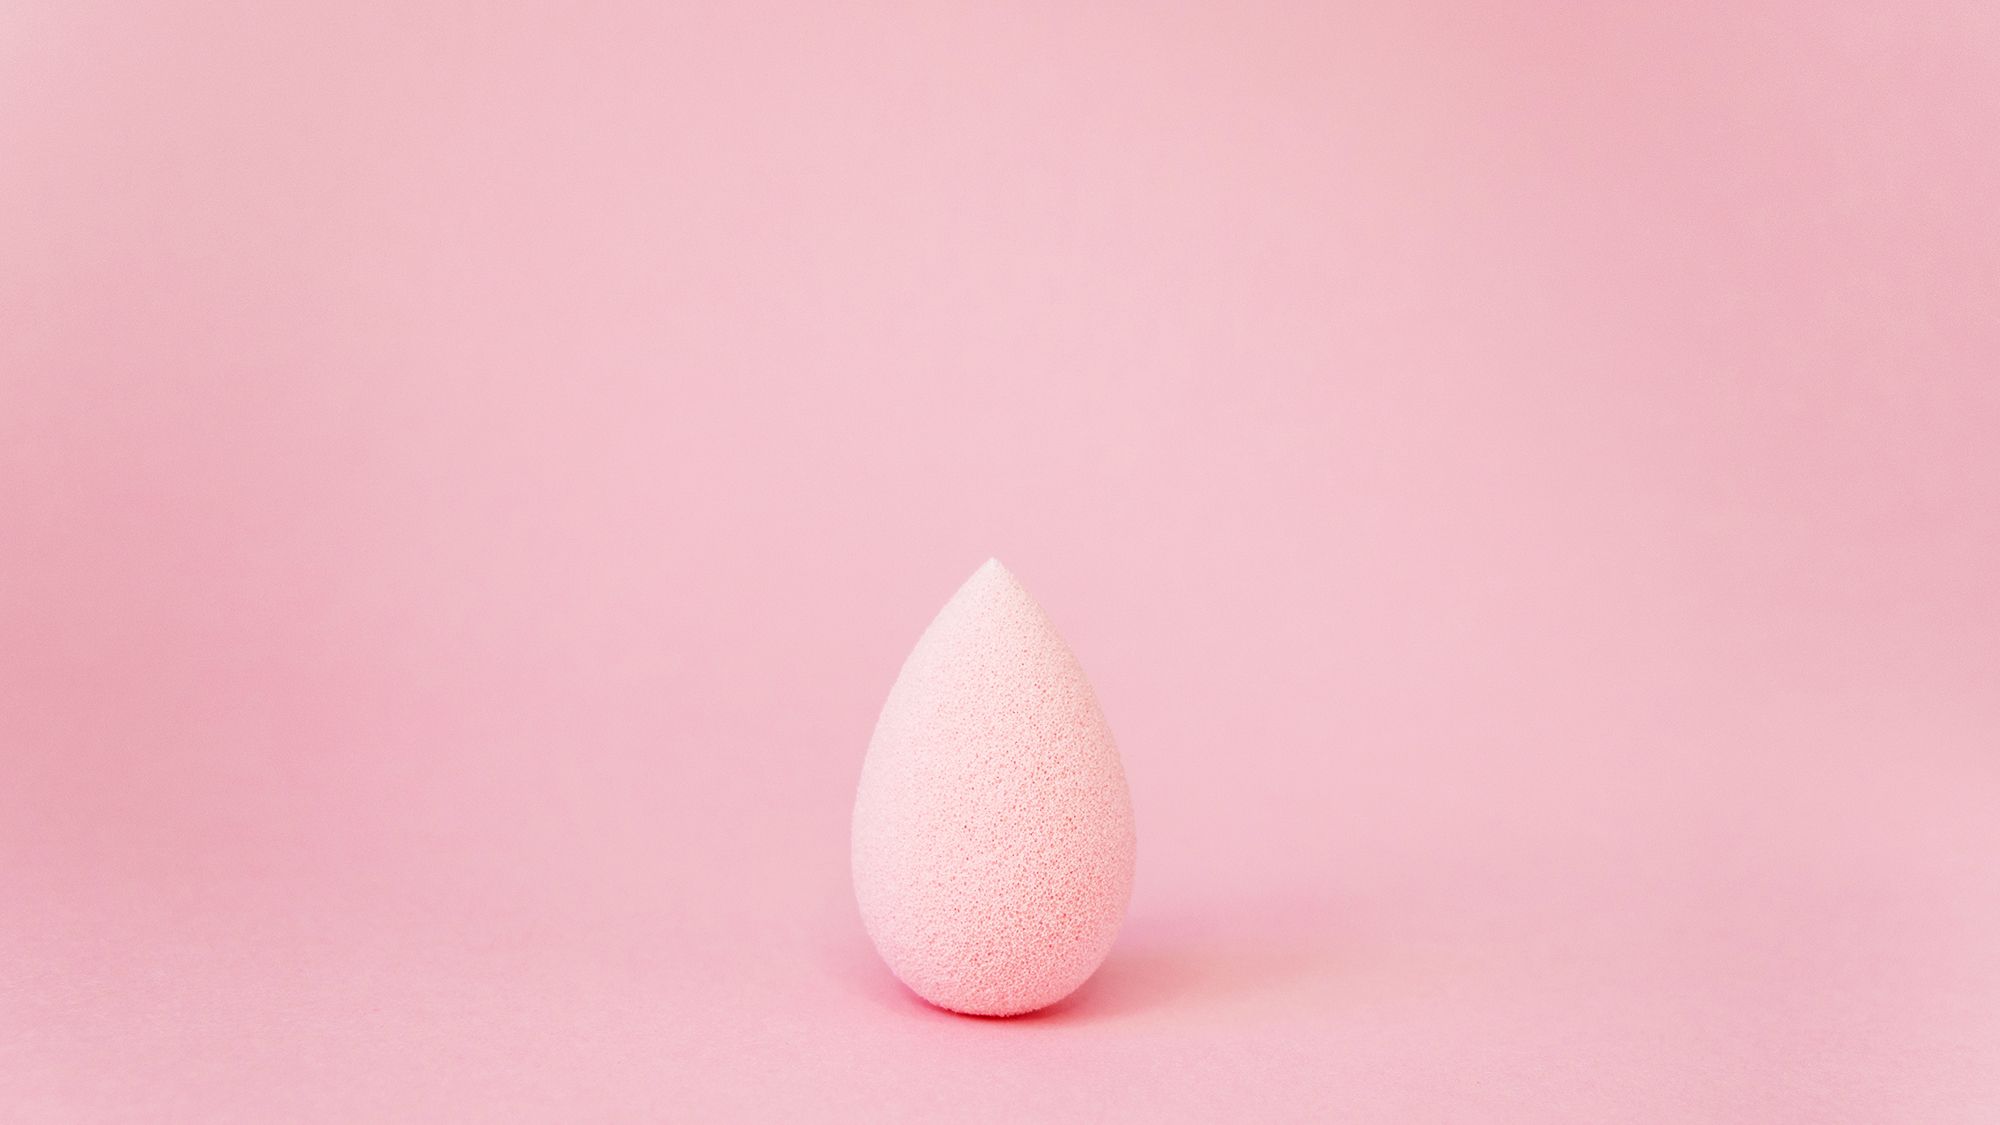 How to Clean a Beauty Blender - Best Way to Wash a Makeup Sponge